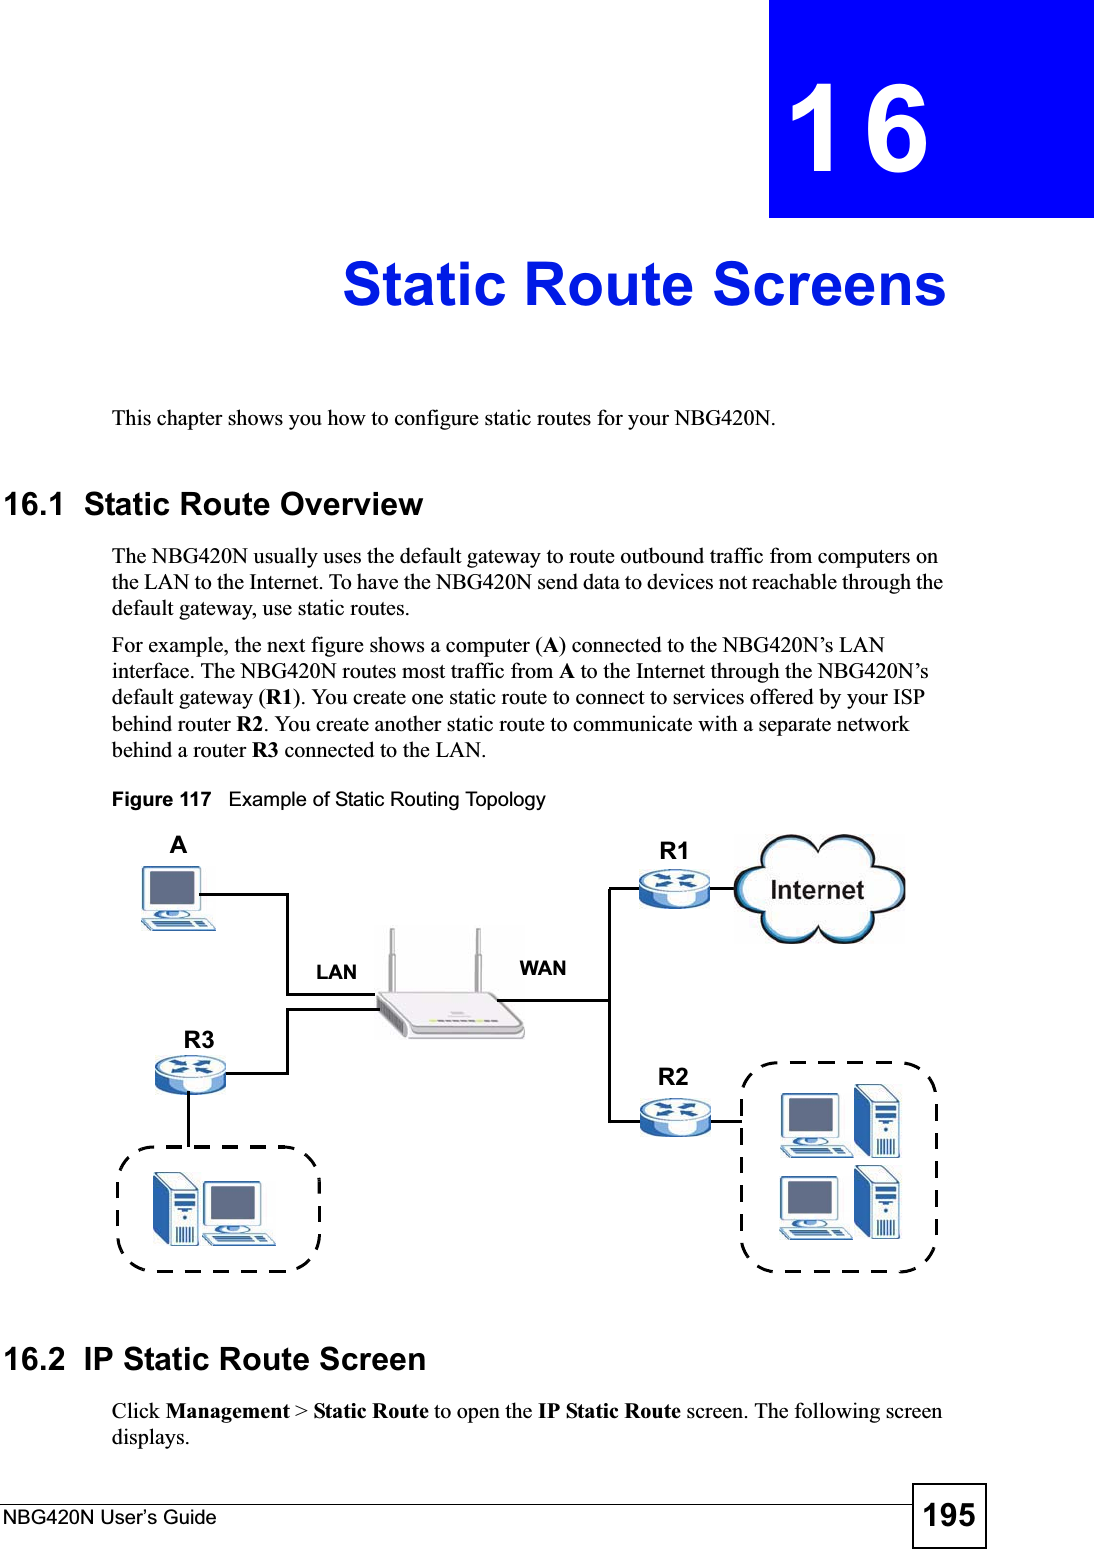 NBG420N User’s Guide 195CHAPTER 16Static Route ScreensThis chapter shows you how to configure static routes for your NBG420N.16.1  Static Route OverviewThe NBG420N usually uses the default gateway to route outbound traffic from computers on the LAN to the Internet. To have the NBG420N send data to devices not reachable through the default gateway, use static routes.For example, the next figure shows a computer (A) connected to the NBG420N’s LAN interface. The NBG420N routes most traffic from Ato the Internet through the NBG420N’s default gateway (R1). You create one static route to connect to services offered by your ISP behind router R2. You create another static route to communicate with a separate network behind a router R3 connected to the LAN.Figure 117   Example of Static Routing Topology16.2  IP Static Route ScreenClick Management &gt; Static Route to open the IP Static Route screen. The following screen displays.WANR1R2AR3LAN